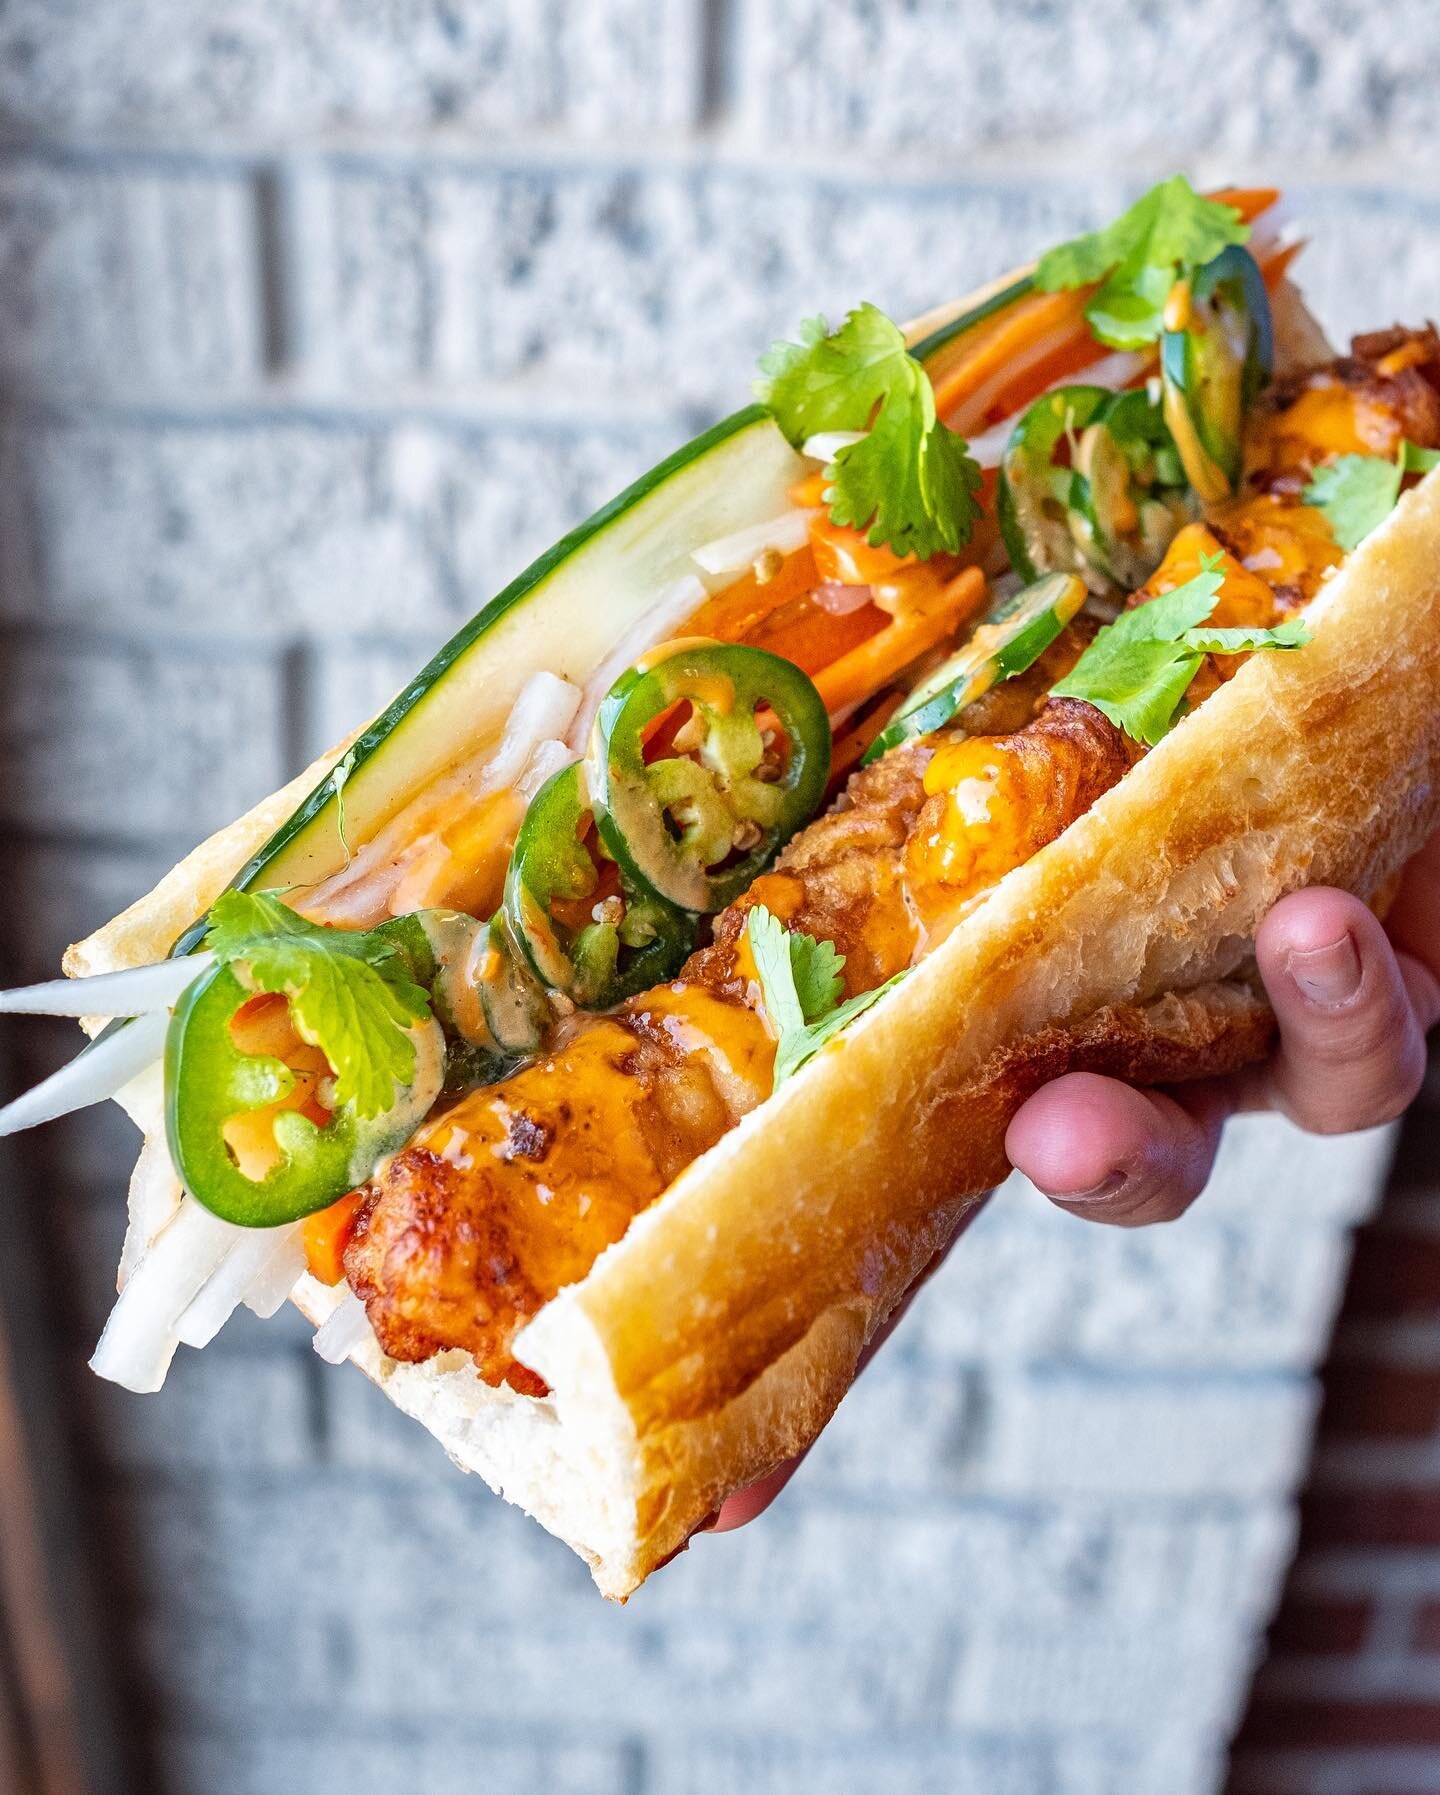 One more Fish Friday special! This one is our tempura cod b&aacute;nh m&igrave;, including house tempura cod, pickled carrot and daikon, cucumber, jalape&ntilde;o, cilantro, and a drizzle of bang bang sauce on b&aacute;nh m&igrave; bread. Only a limi